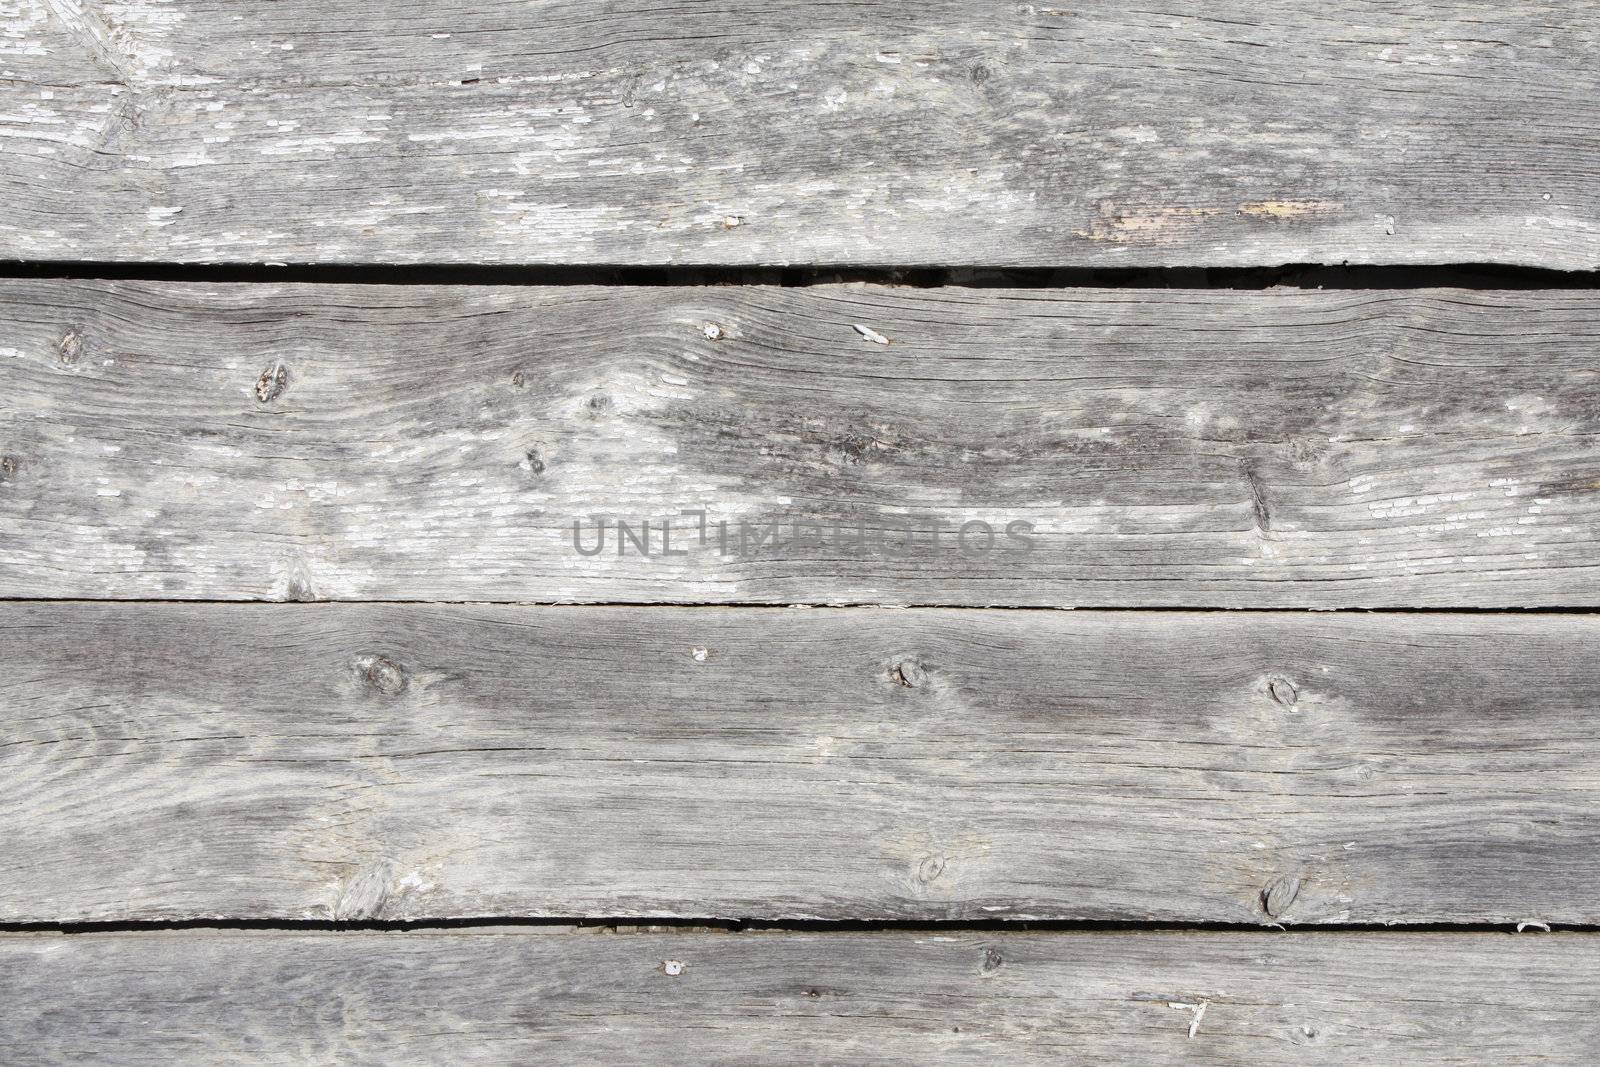 A close up image of shabby, peeling weathered old barn boards that were once painted white.